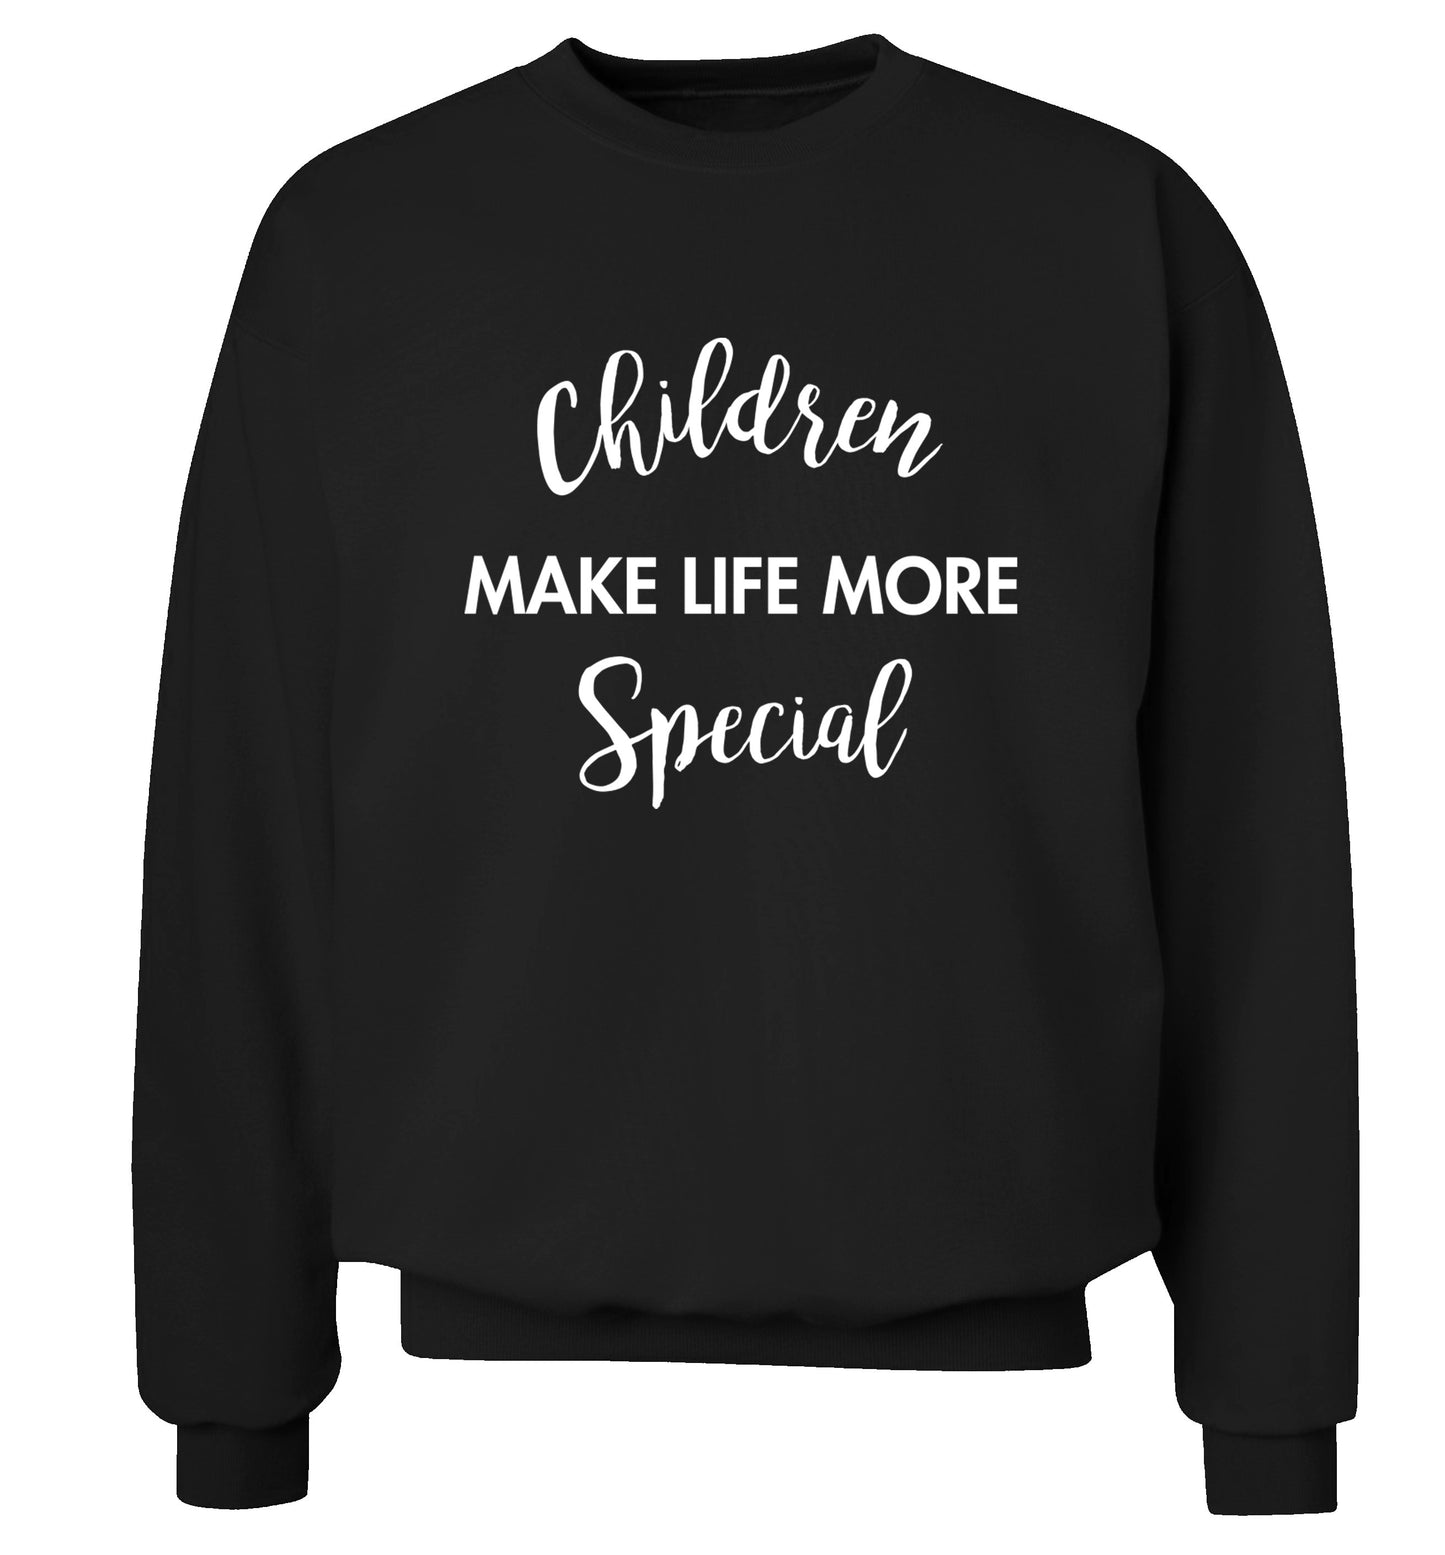 Children make life more special Adult's unisex black Sweater 2XL